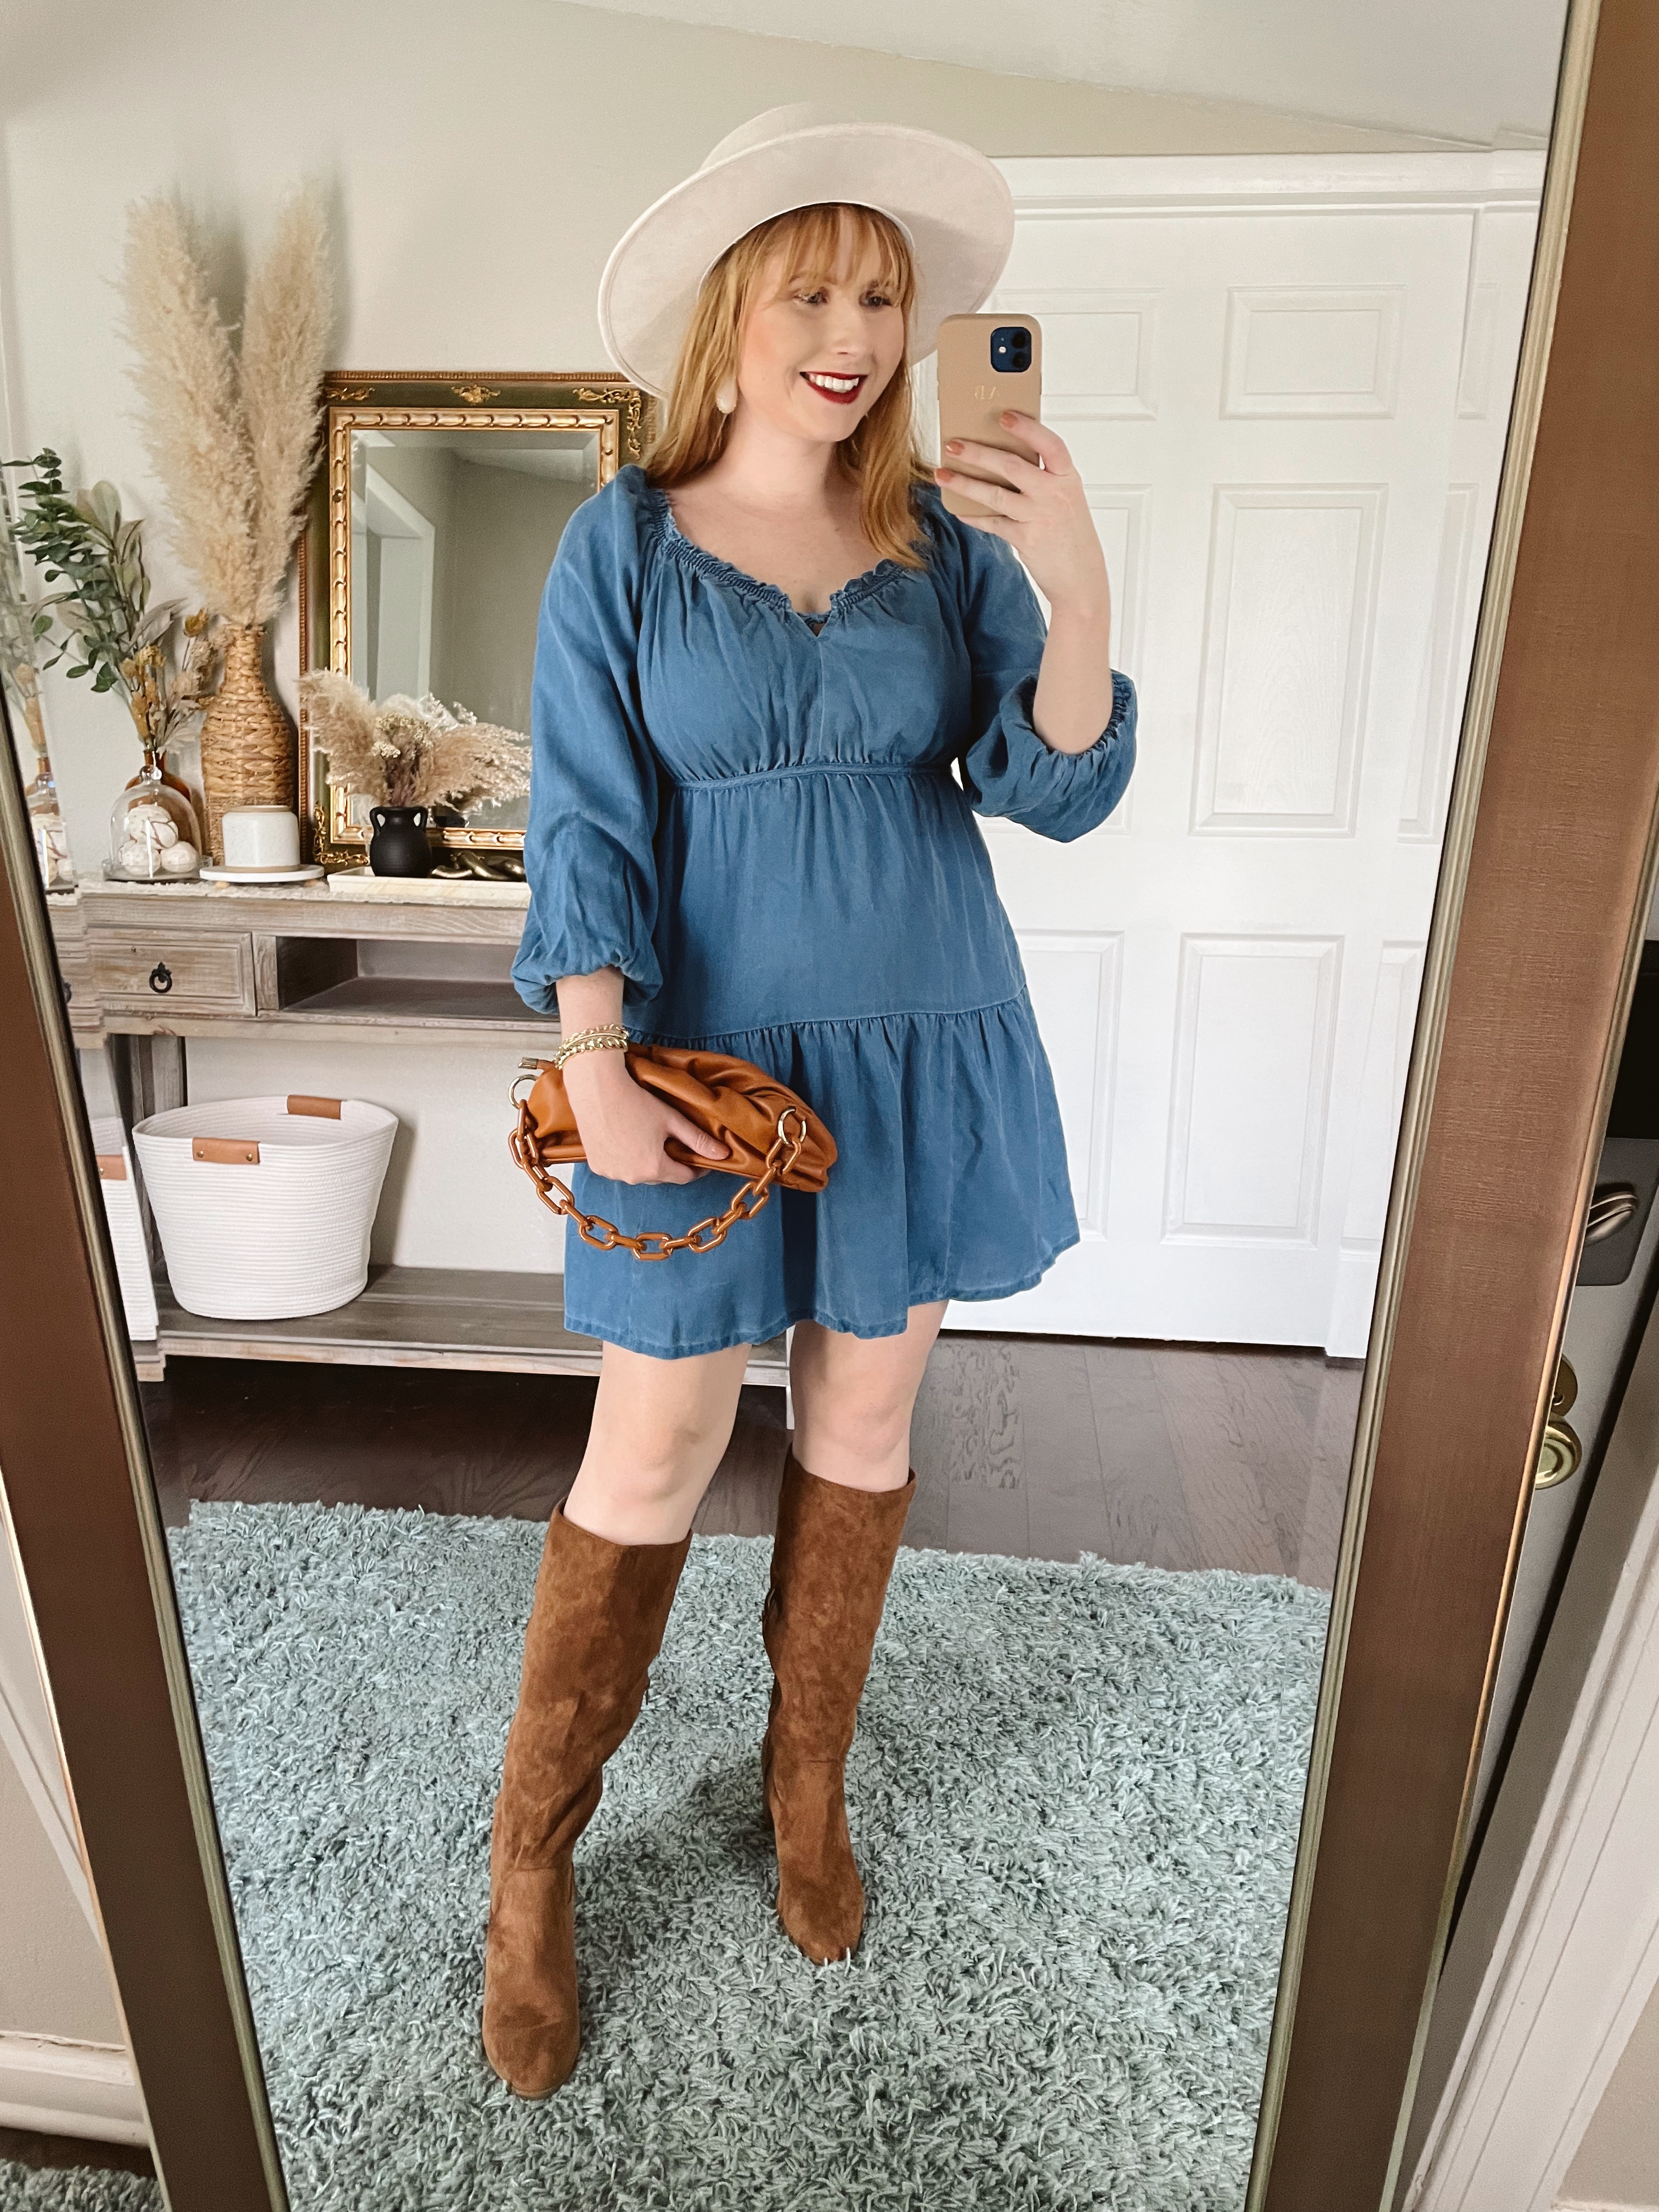 Old Navy dresses to wear with tall boots. I love a shorter skirt with